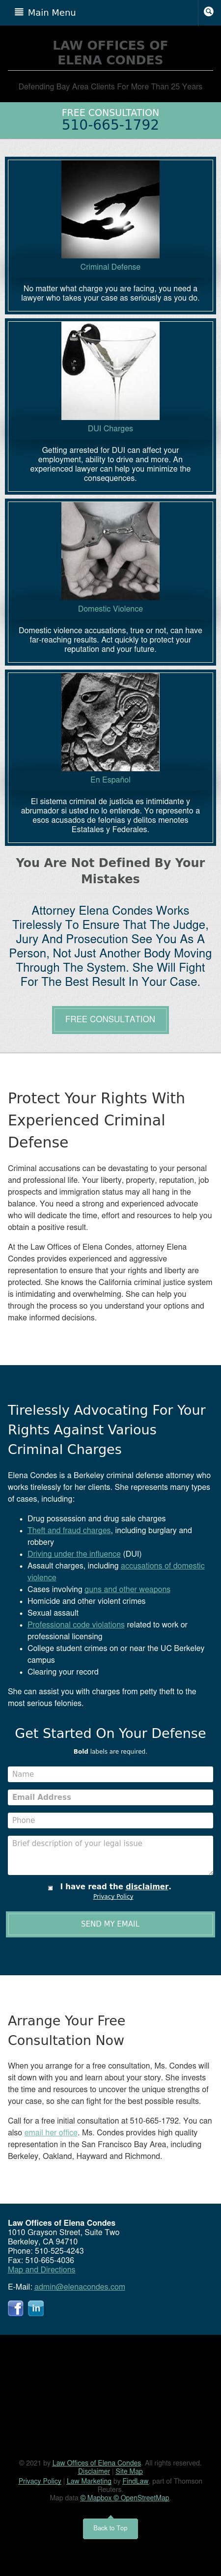 Law Offices of Elena Condes - Berkeley CA Lawyers